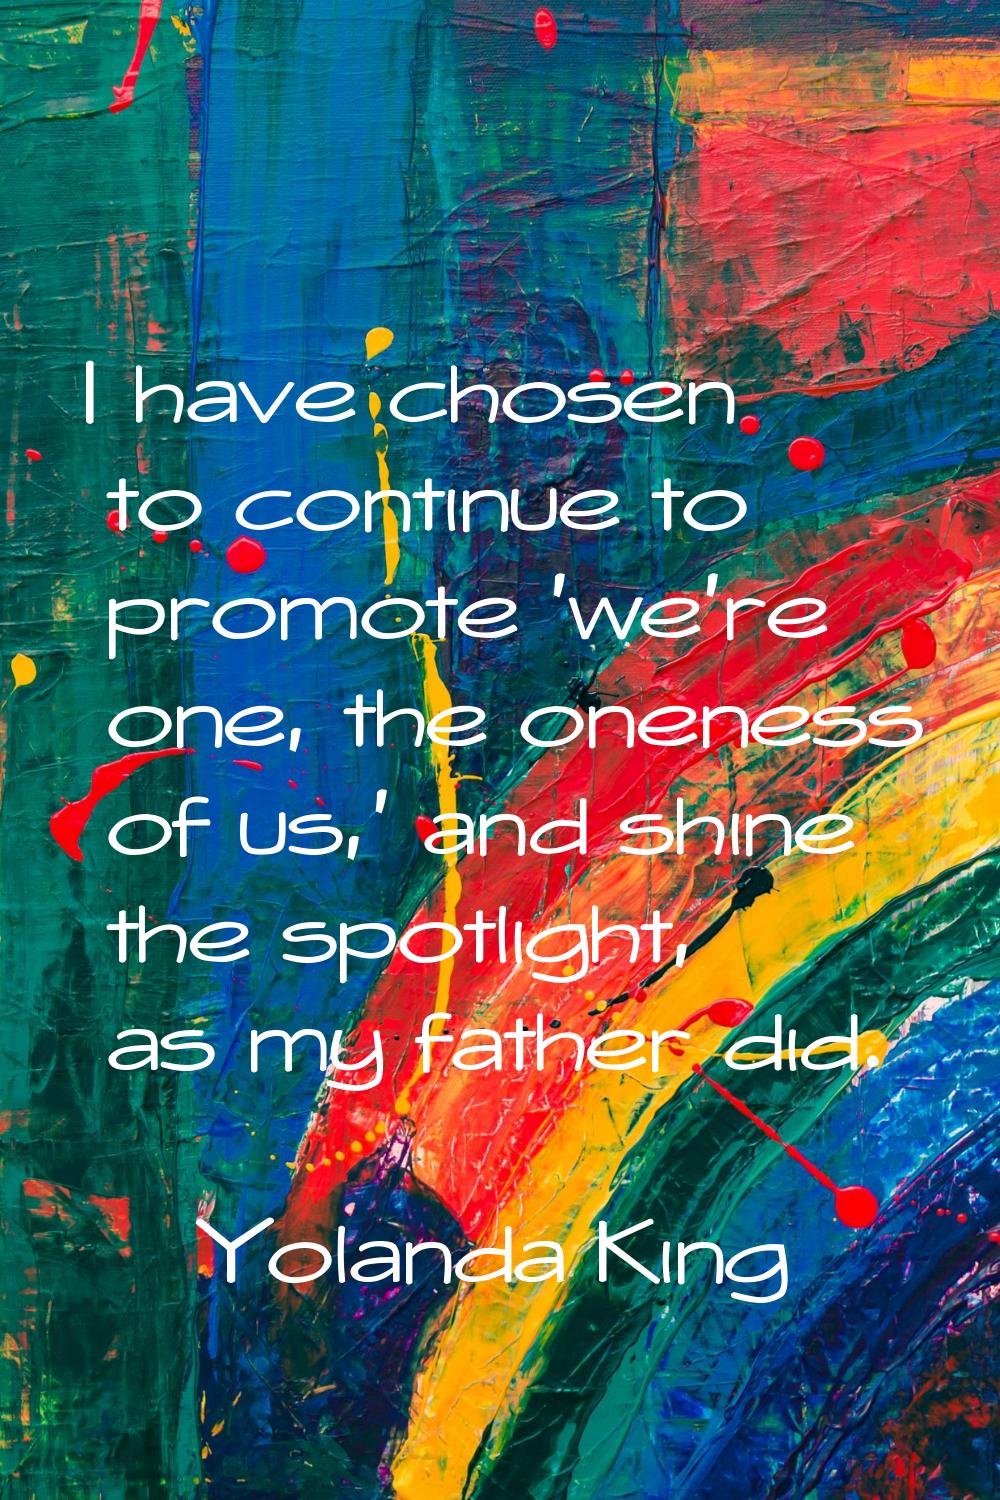 I have chosen to continue to promote 'we're one, the oneness of us,' and shine the spotlight, as my